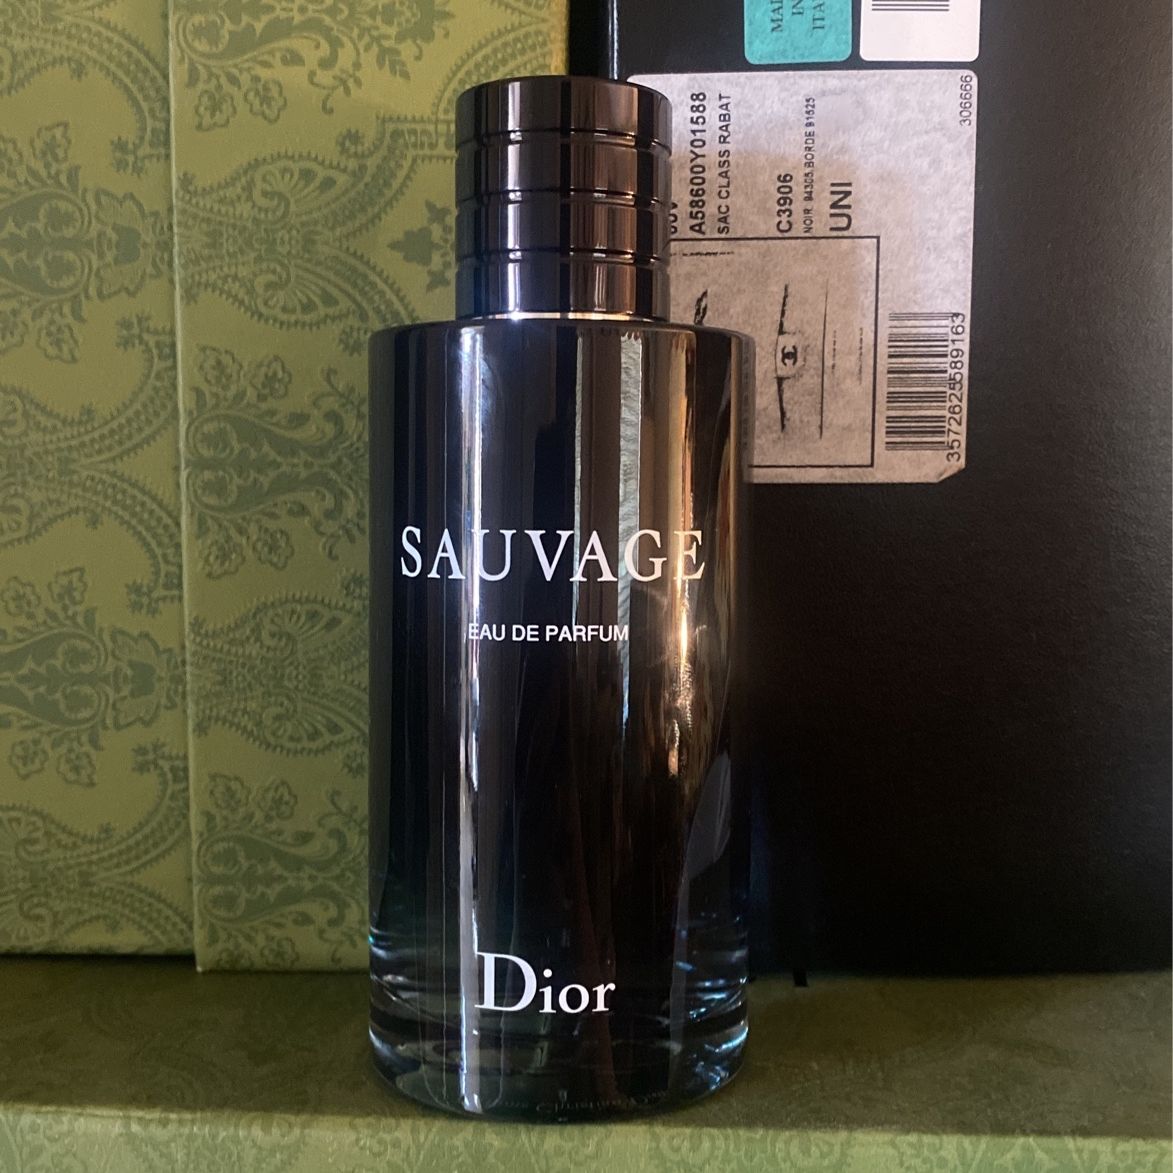 Mens Cologne for Sale in Corona, CA - OfferUp